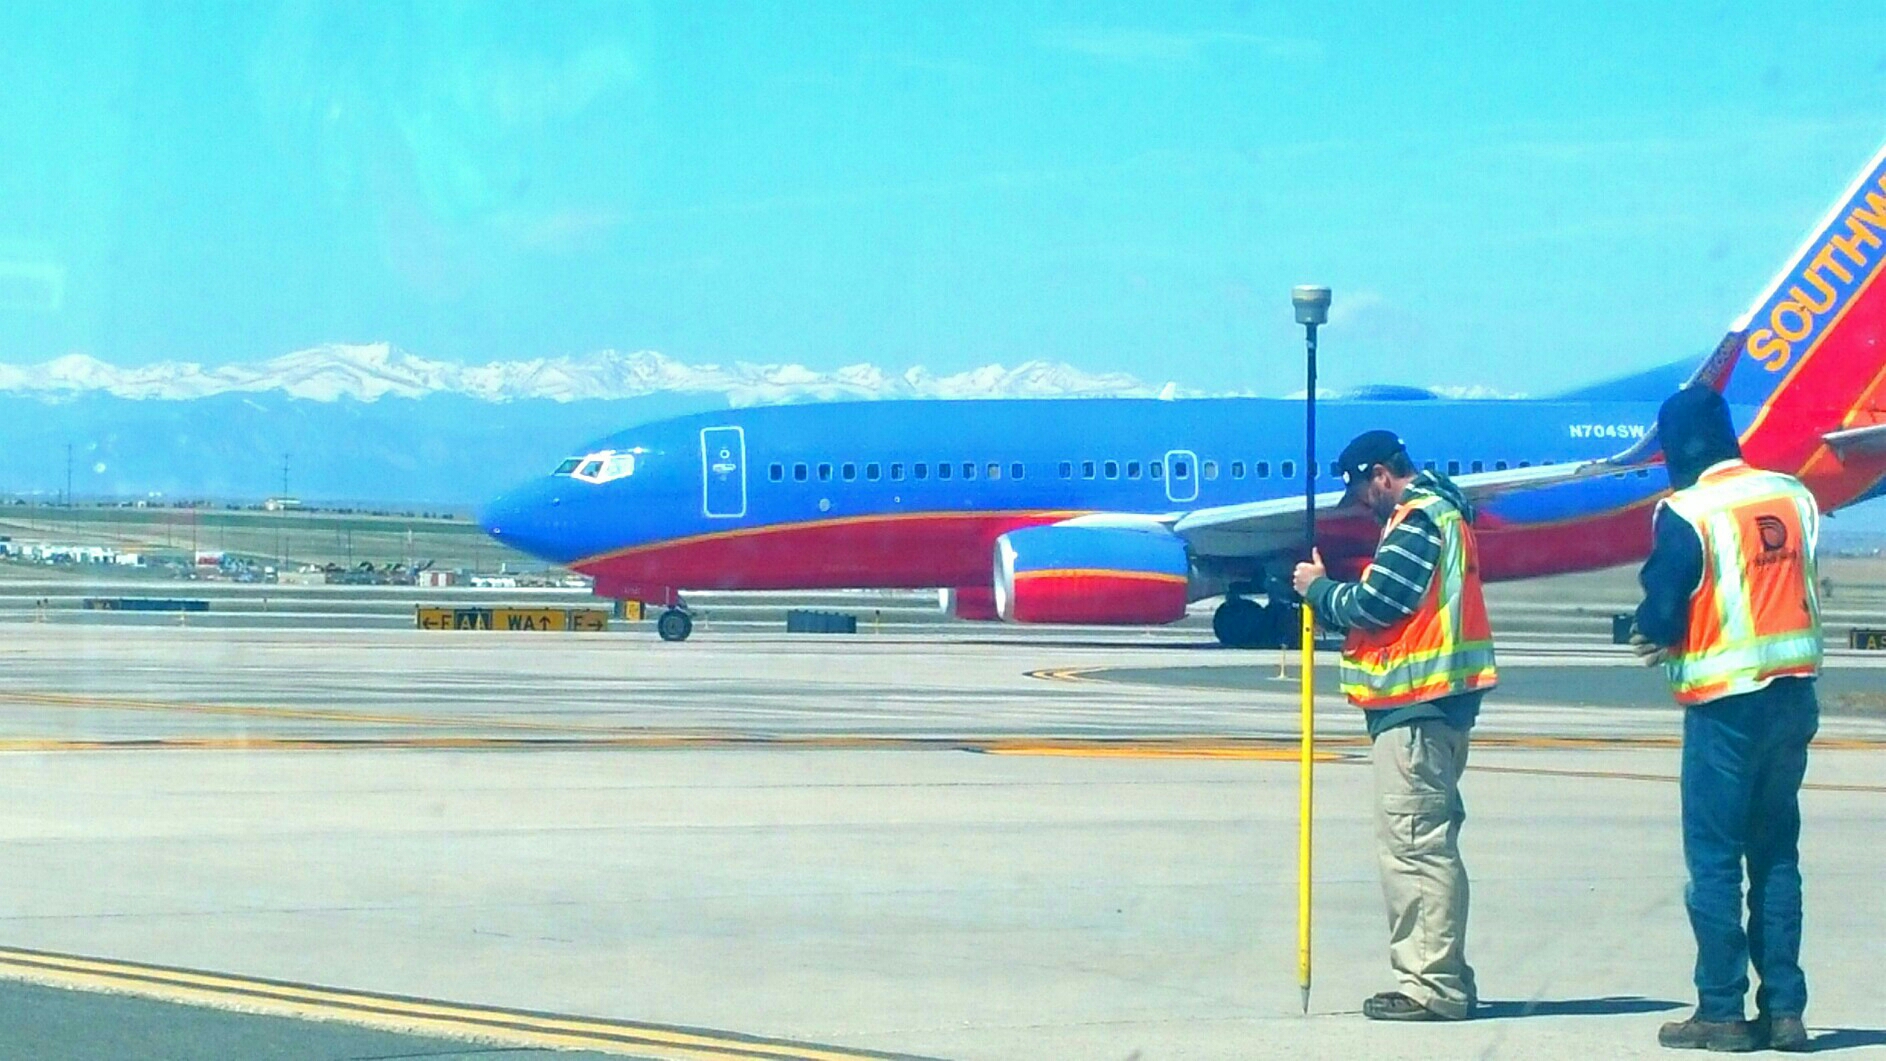 Denver Water survey crew working on a runway at Denver International Airport with a view of a Southwest Airlines jet and the snow-capped Rocky Mountains behind them.